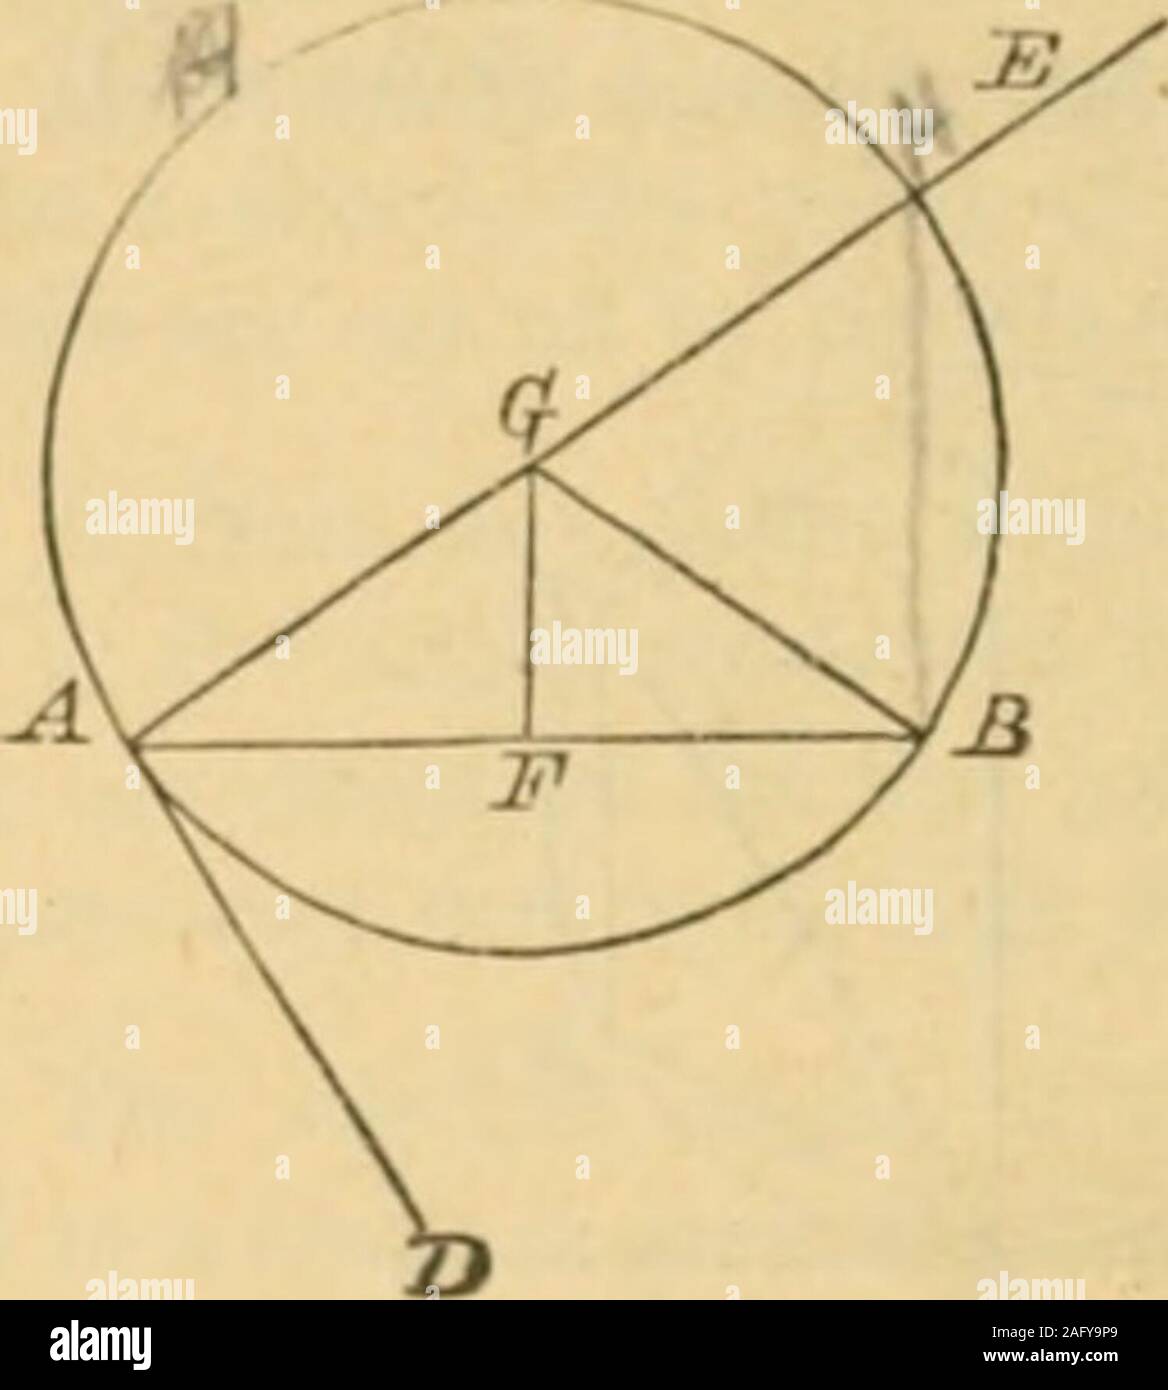 . Elements of geometry : containing books I to III. chord FD, dividing the ©into segments FCD, FED.Then mud z DFB= z in segment F,and 1 DFA= z in segment FED.From F draw the chord EC ±.to AB. Then FC is a diameter of the • , III. 19. Take any pt. E in the arc FED, and join FE, ED. Di I. DFB=sum of z s .F£D, .FCD ;and z iii; has been proved = z .FCD ; :.lDFA= lEED,that is, z DFA= z in segment .FED. Q. E. u. Ex. The chord joining the points of contact of para II gents is a diameter, r64 EUCLIDS ELEMENTS. [Book III. Proposition XXXIII. PROBLEM.On a given straight line to describt a a ..xxt of a c Stock Photo